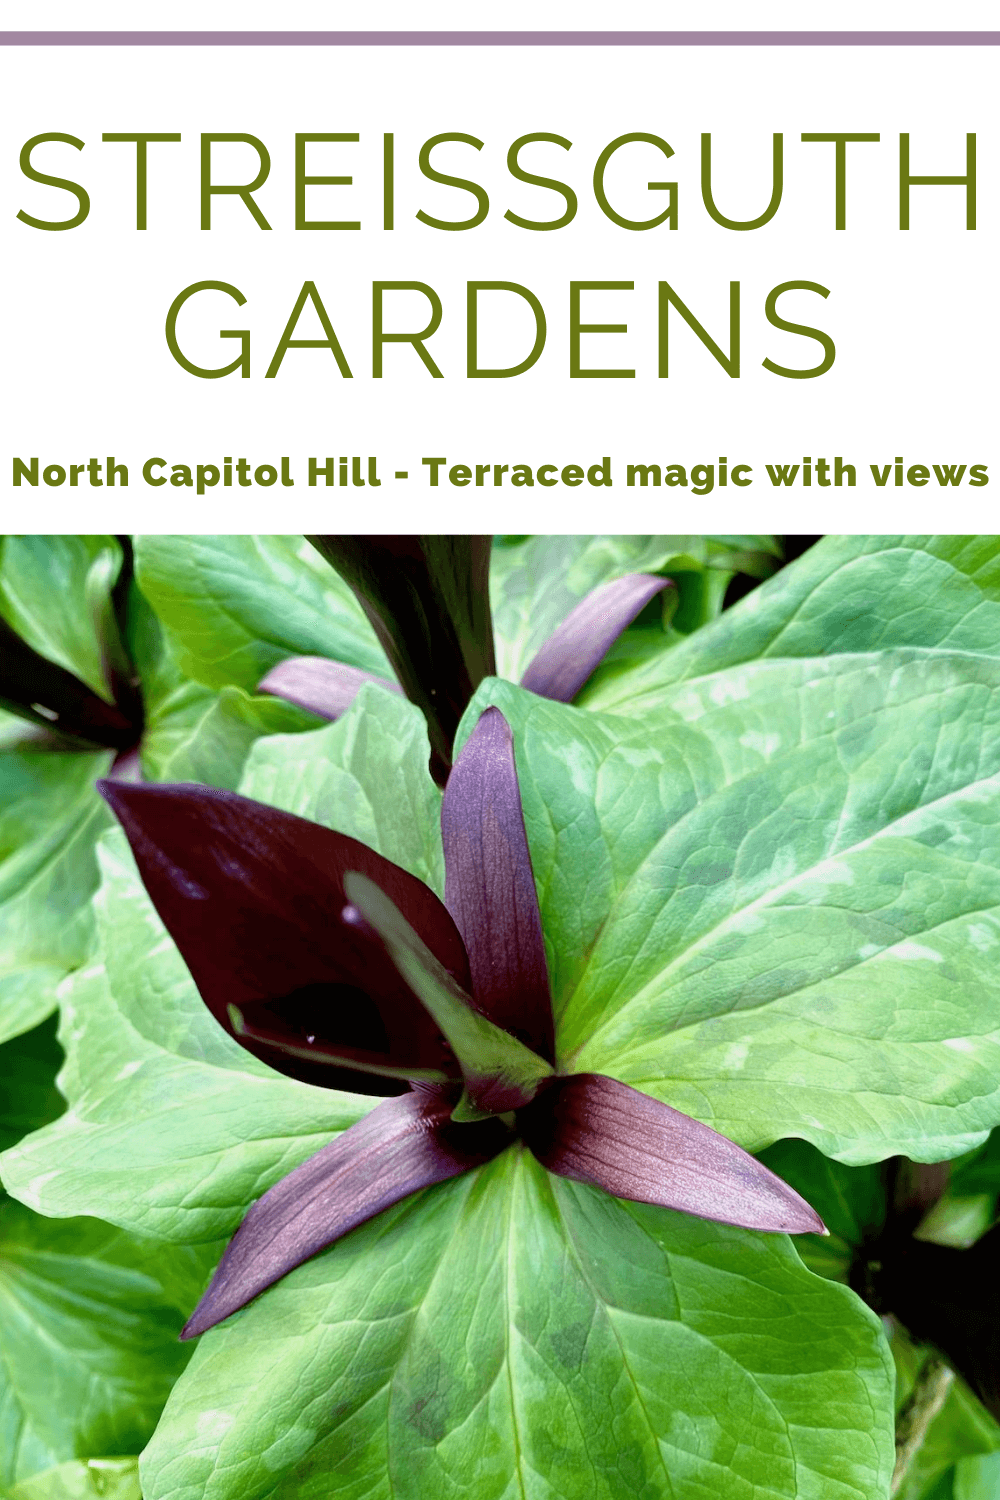 Streissguth Gardens offer year round wonders to Seattle park goers, including this beautiful trillium plant, with a rich purple blossom on top of variegated green leaves.